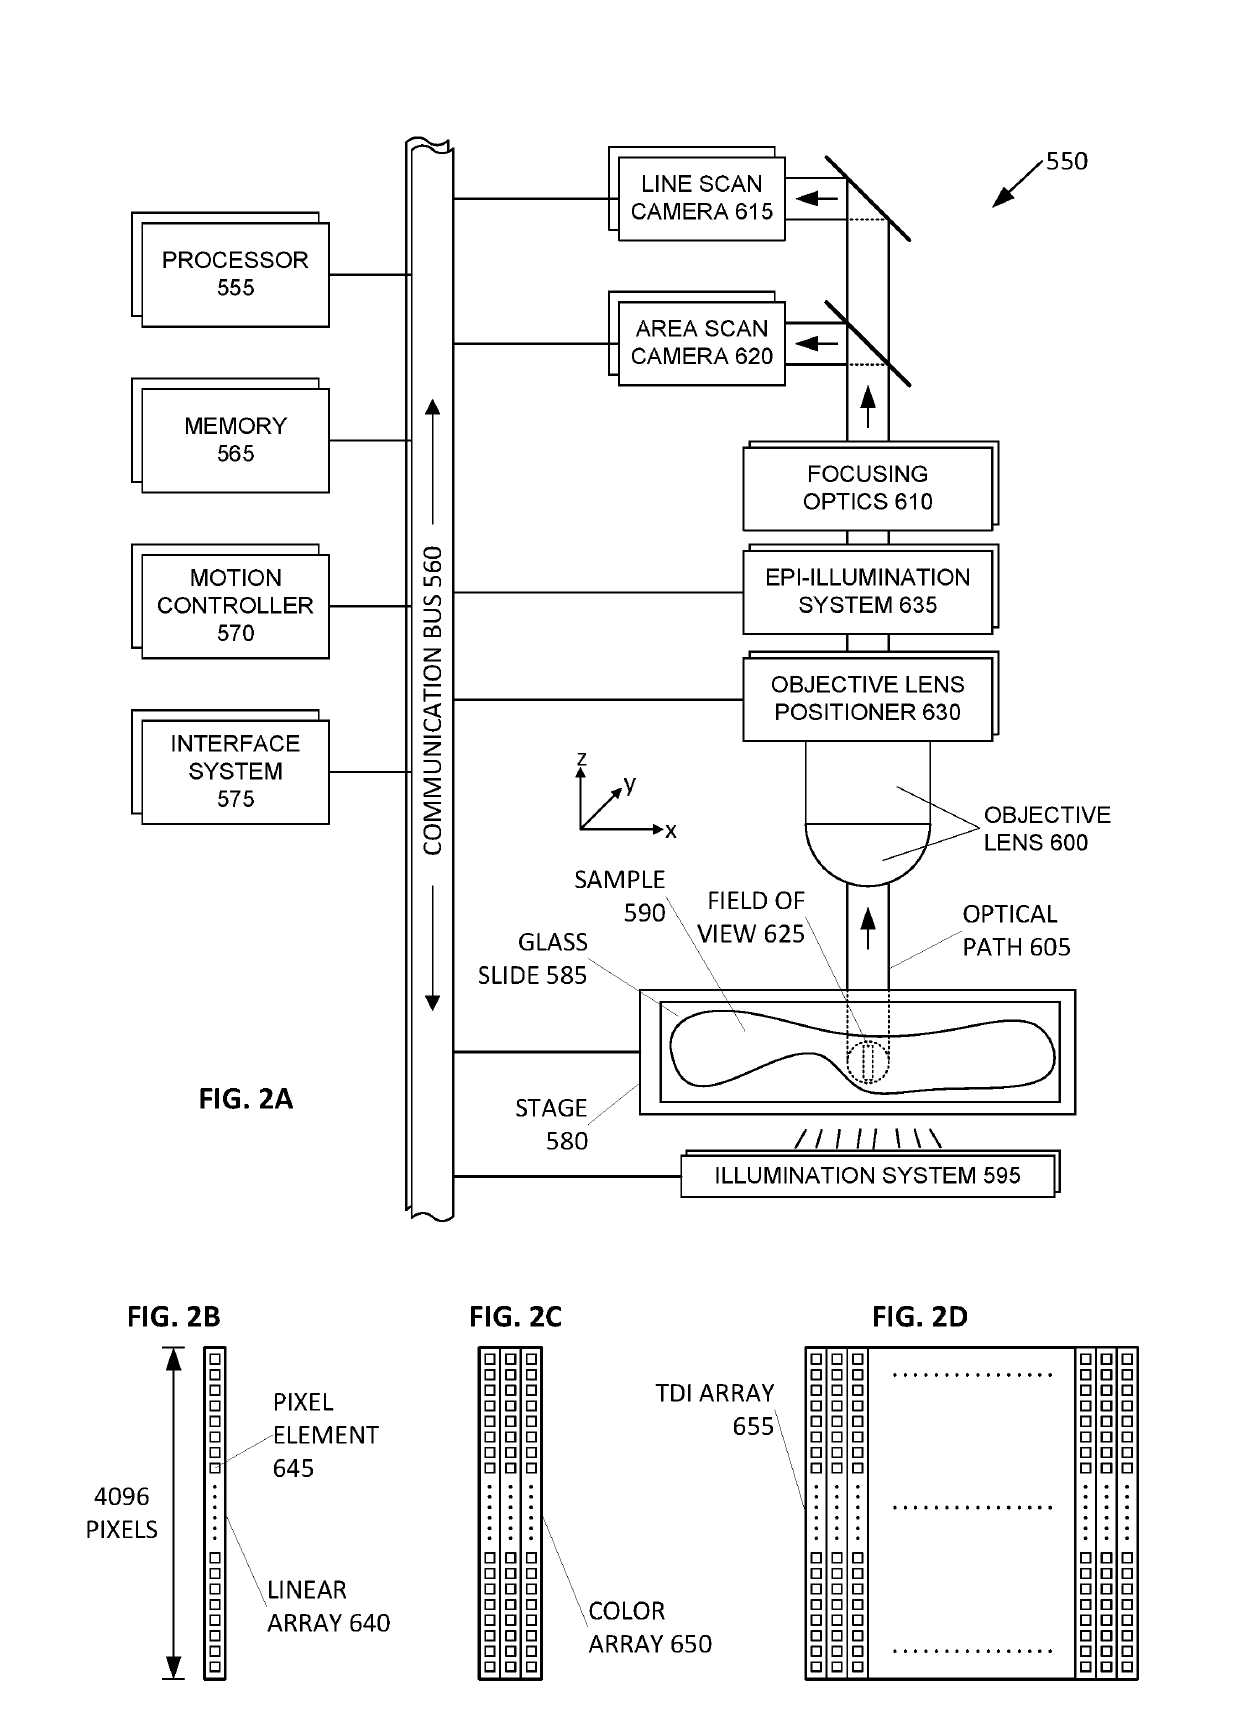 Managing plural scanning devices in a high-throughput laboratory environment